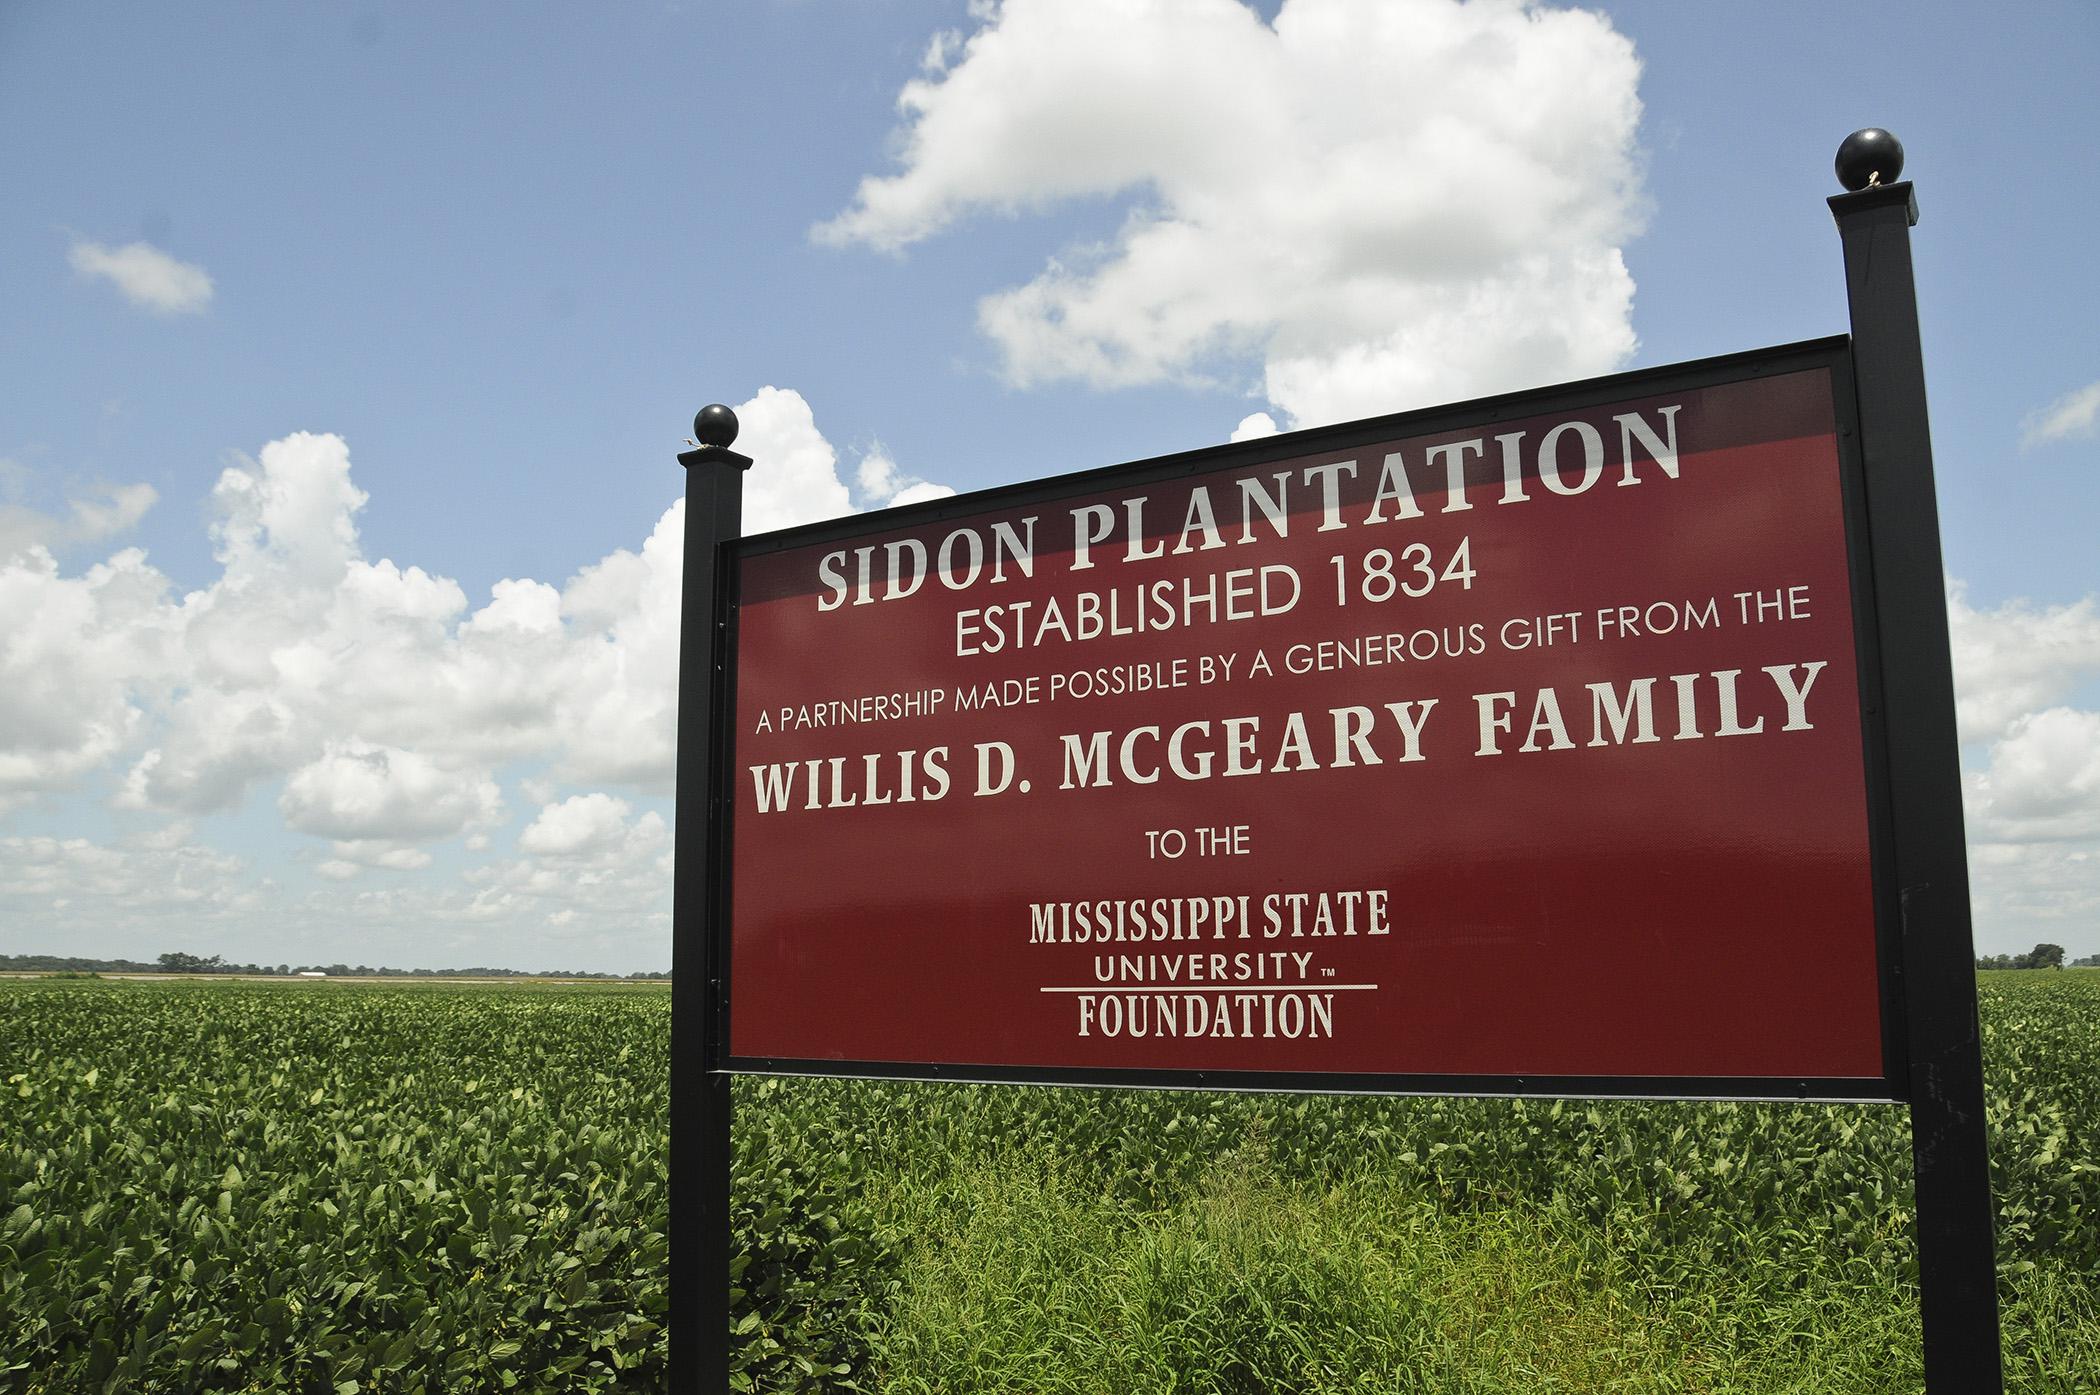 Mississippi State University received an $8 million bequest of real estate, the largest in university history, when Willis D. McGeary donated Sidon Plantation. The gift includes 2,637 acres of land and one of the oldest homes in Leflore County. (Photo by MSU Ag Communications/Scott Corey)